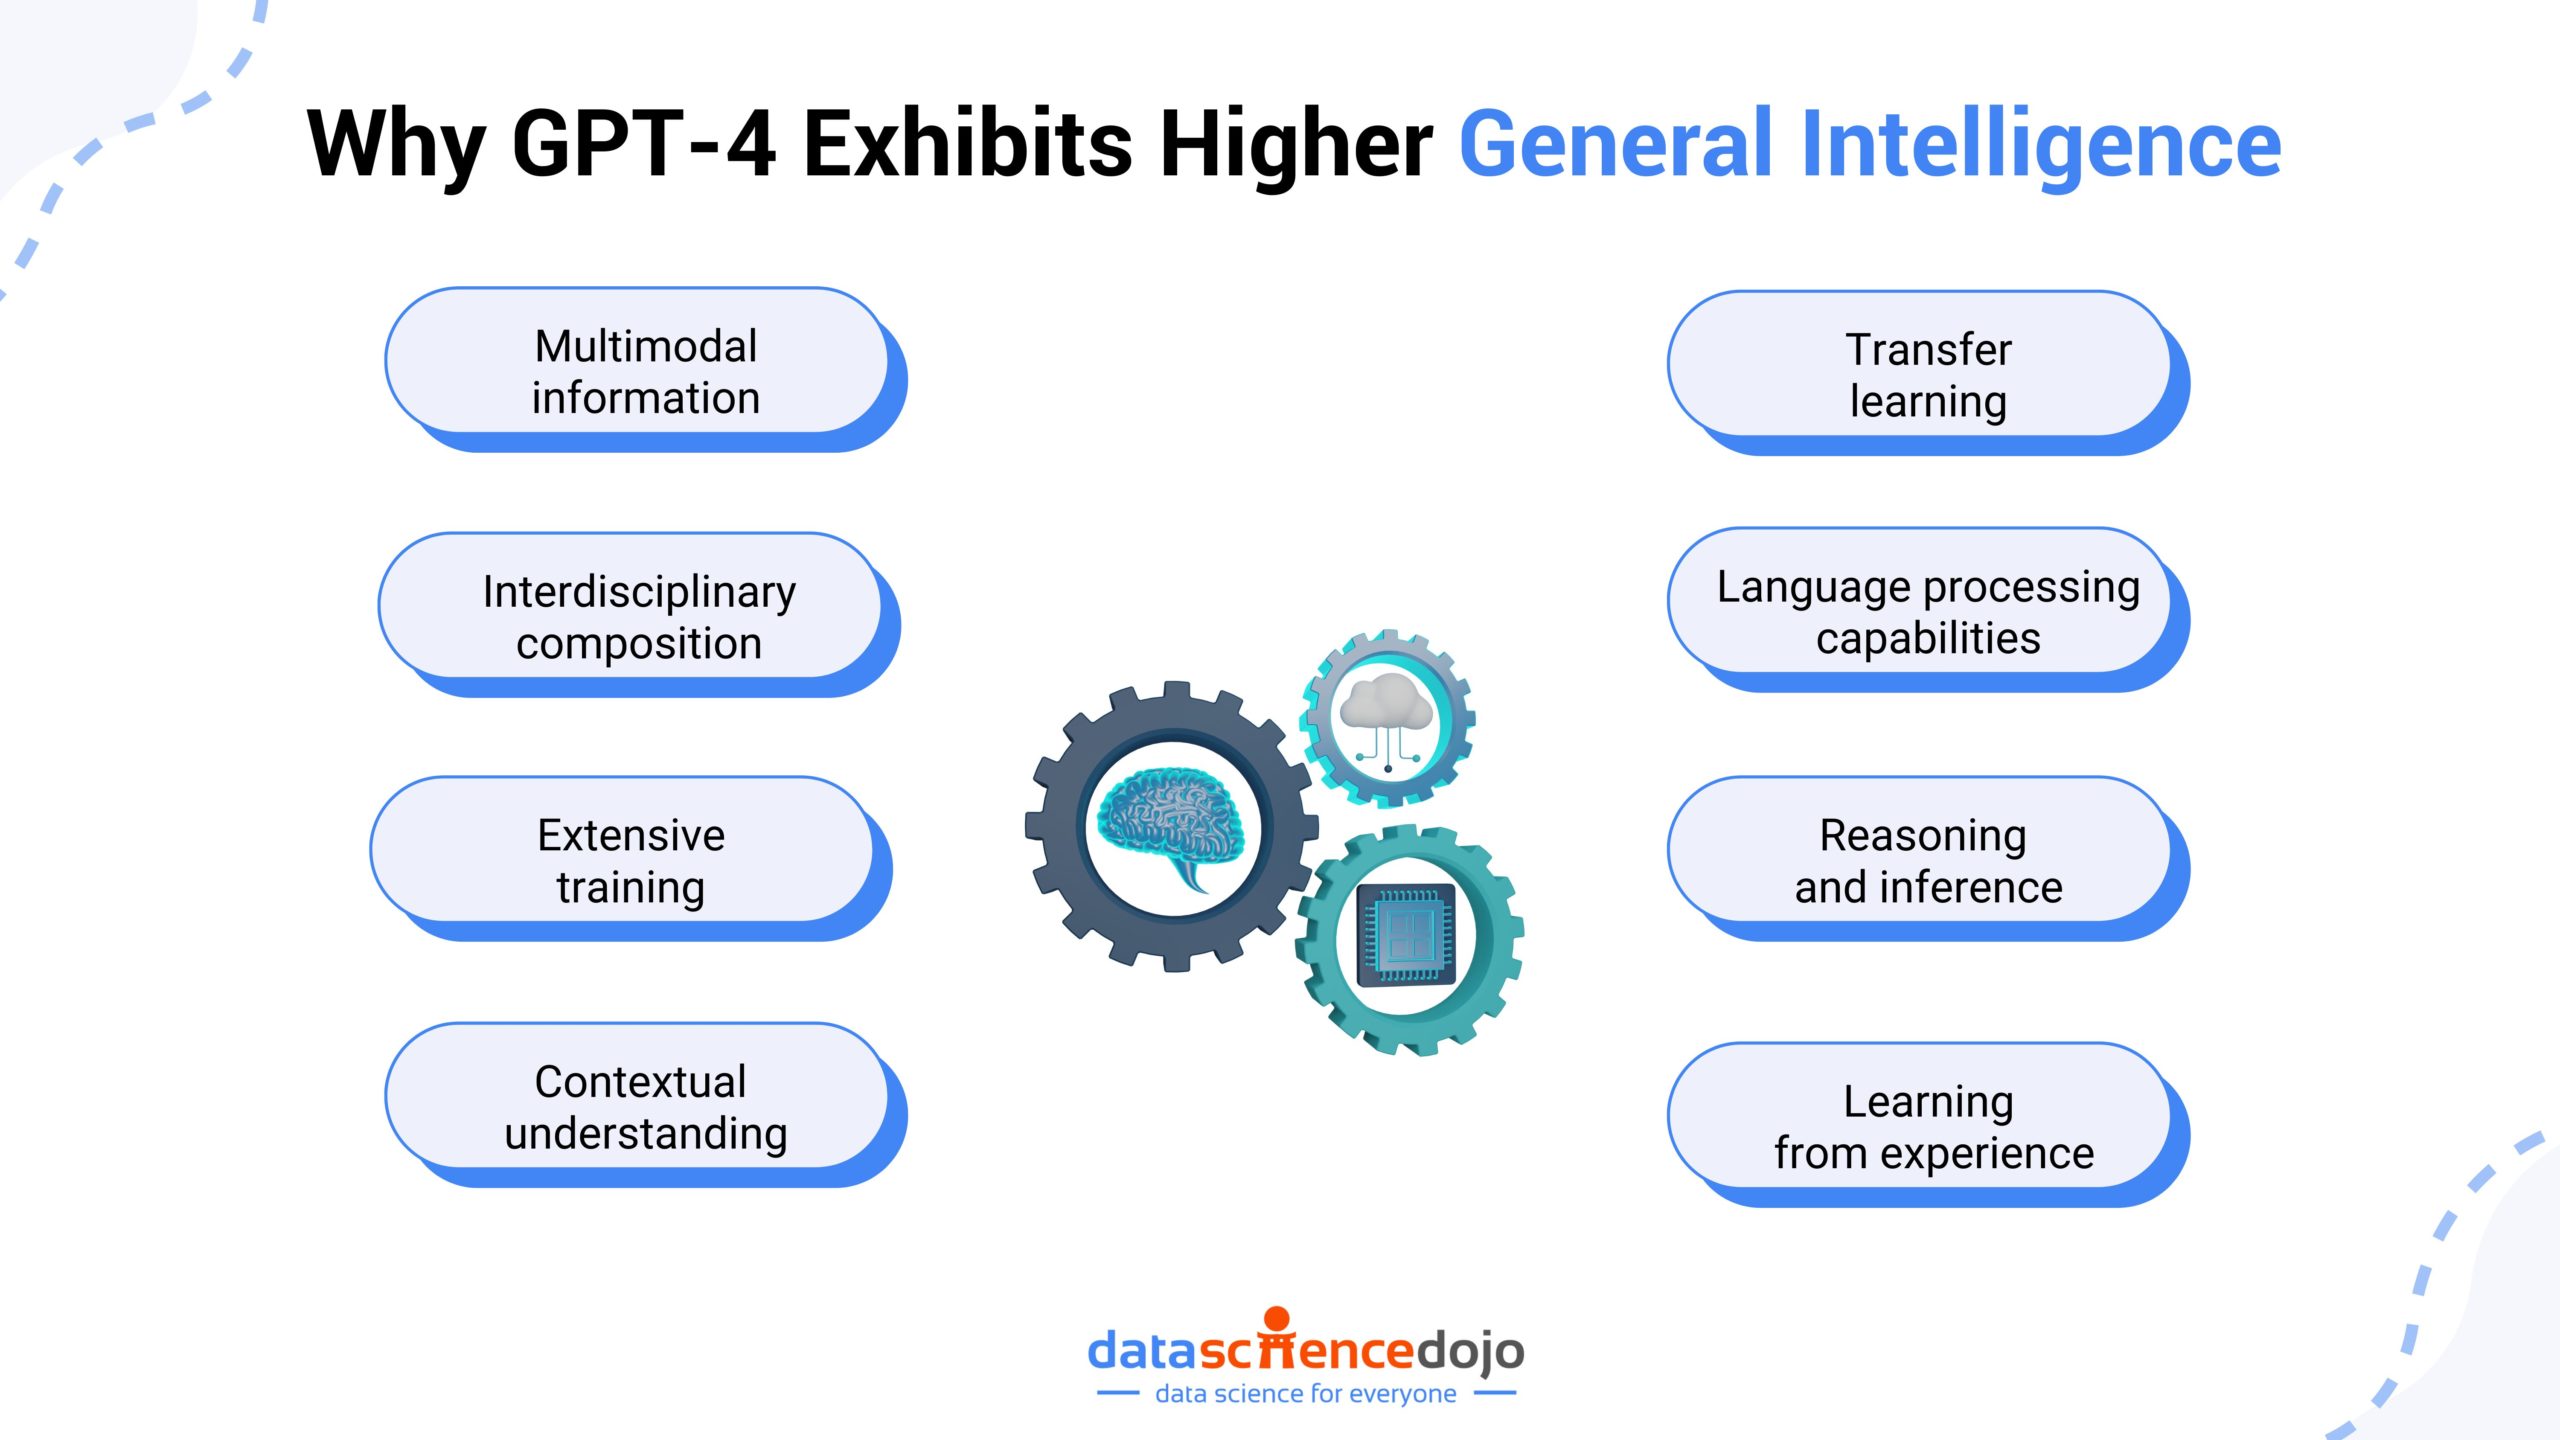 Why GPT-4 Exhibits Higher General Intelligence